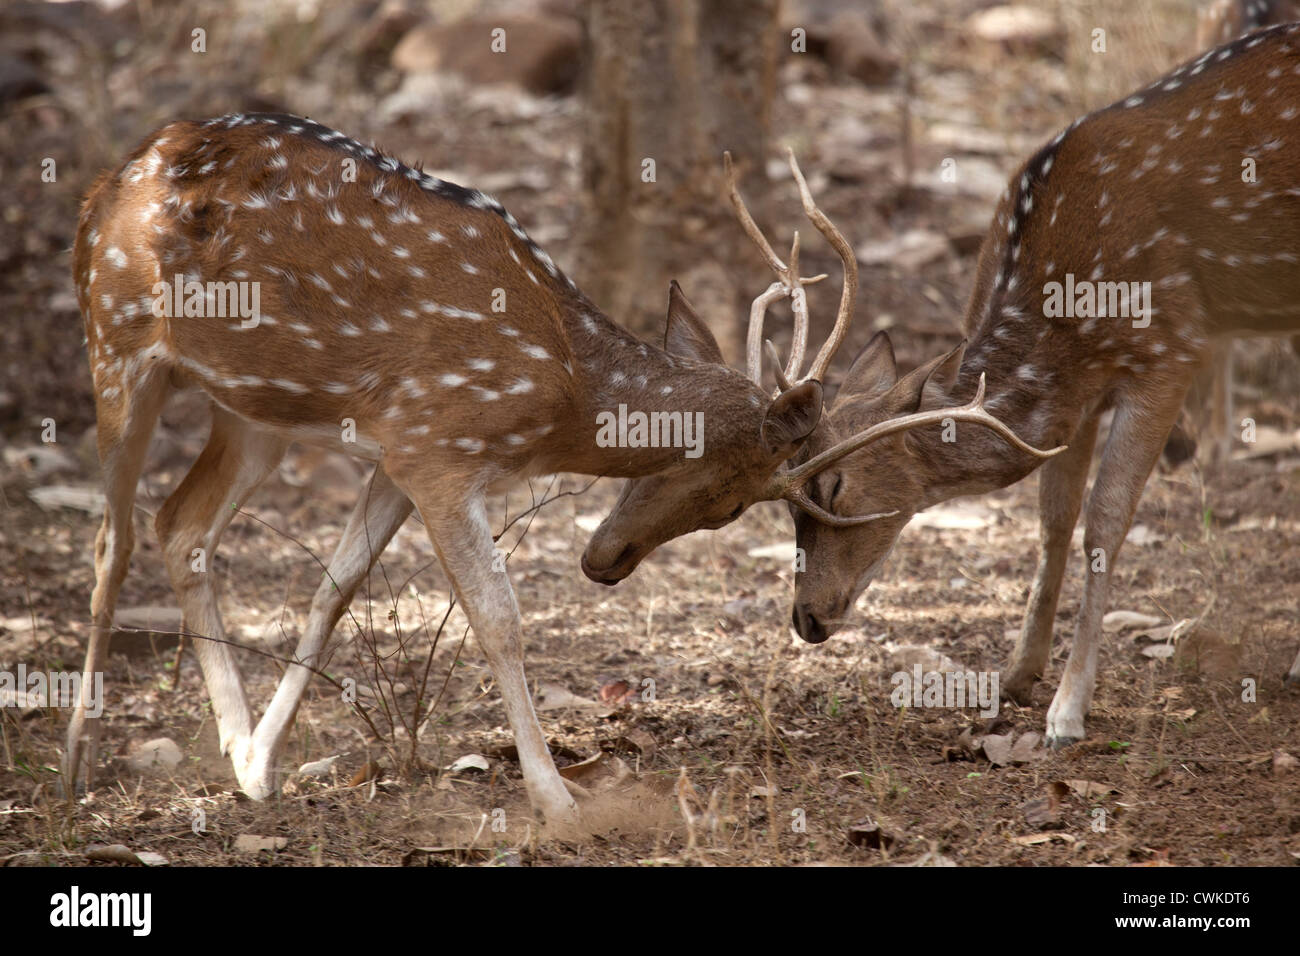 Chital / spotted deer / axis deer (Axis axis), two stags fighting, Ranthambore National Park, Sawai Madhopur, Rajasthan, India Stock Photo